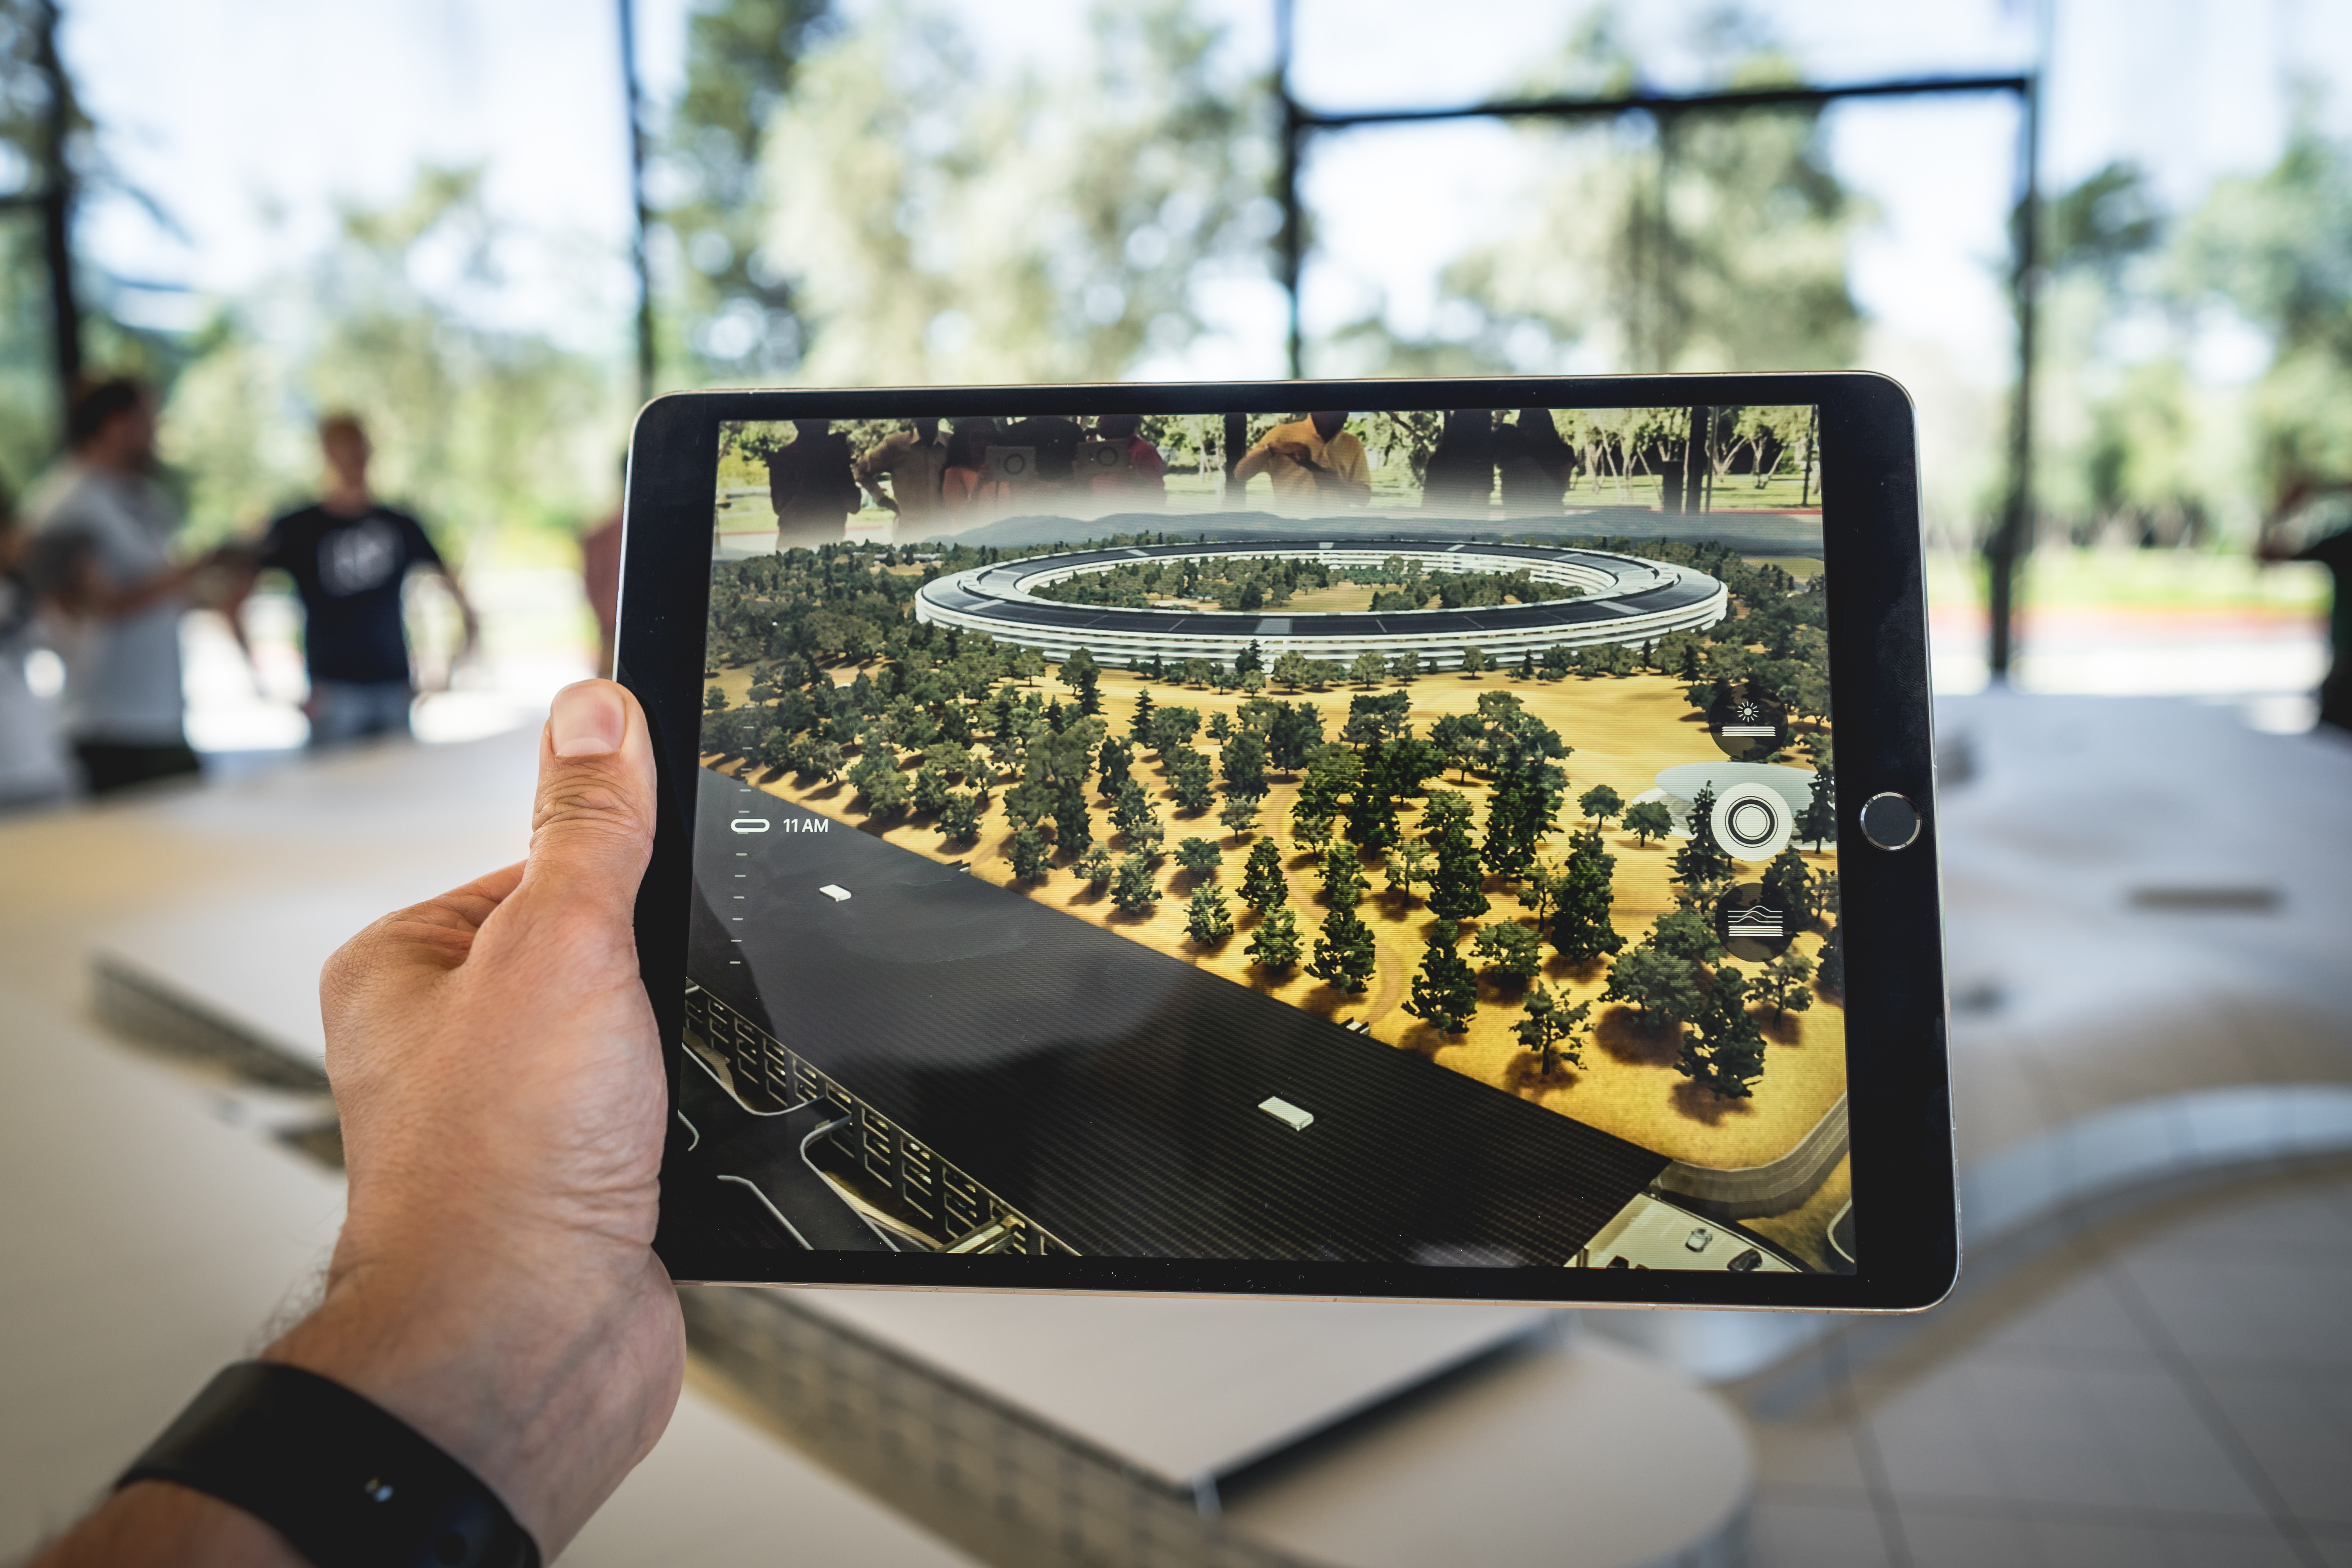 Augmented Reality example shown on an iPad